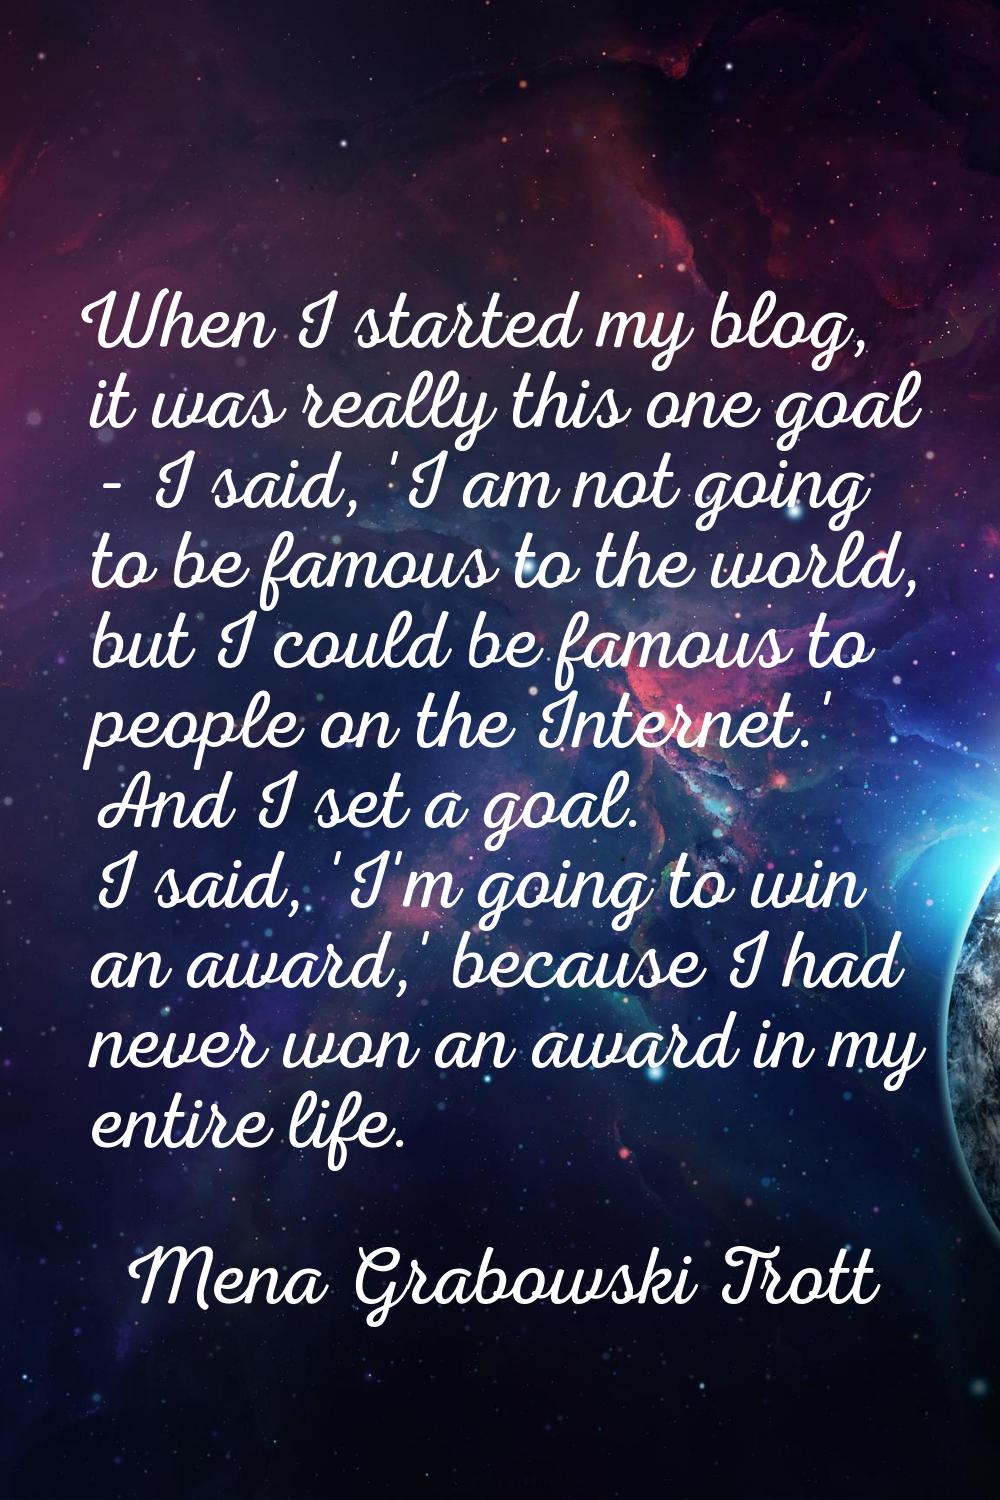 When I started my blog, it was really this one goal - I said, 'I am not going to be famous to the w